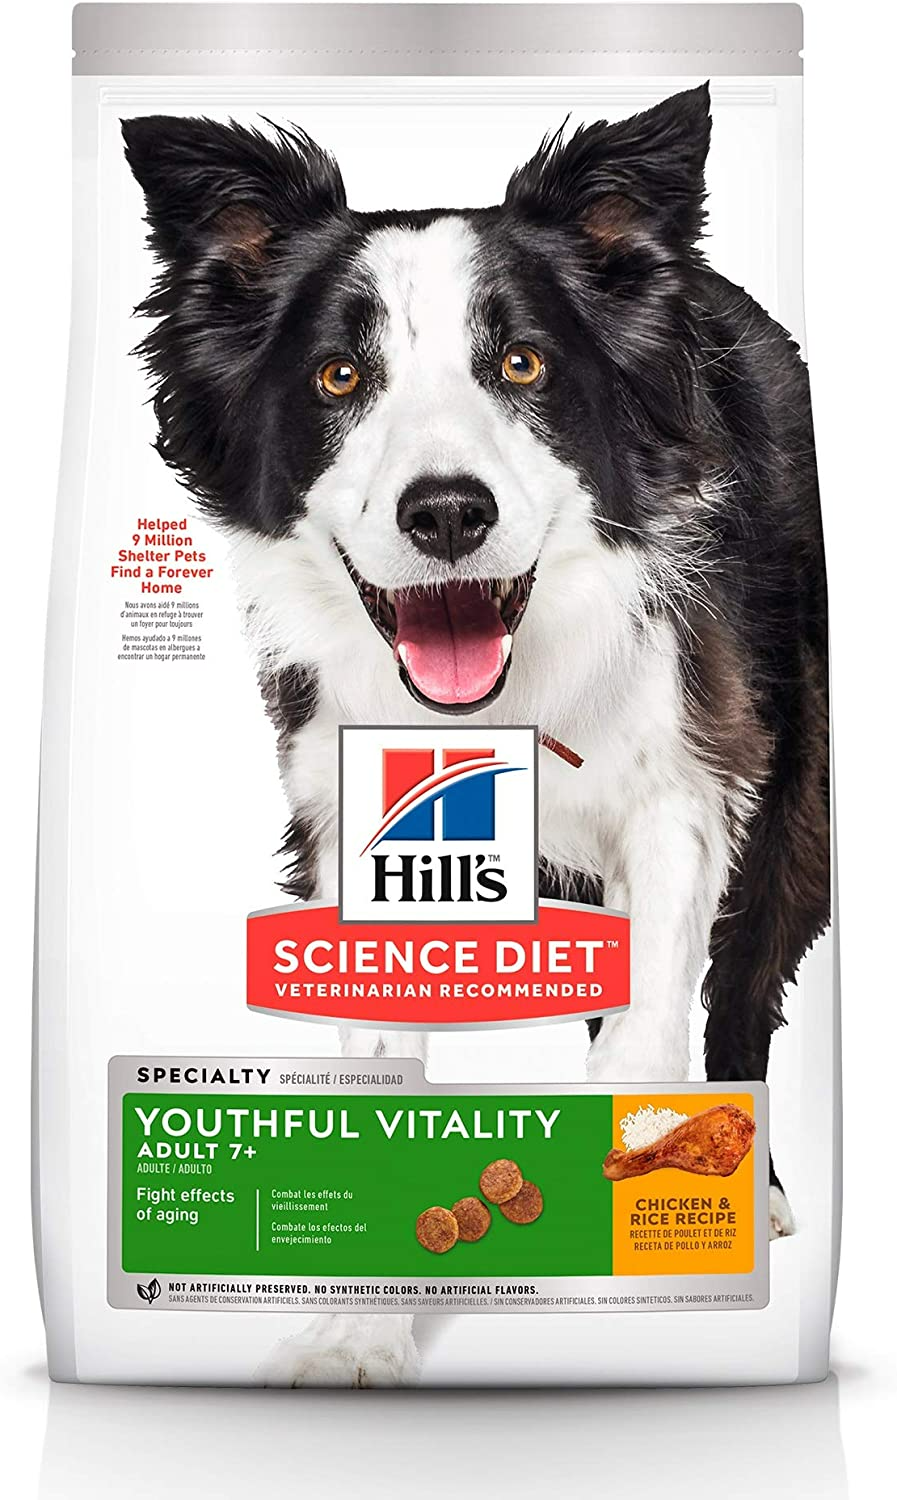 Hills Youthful Vitality Adulto 7+ - Science Diet